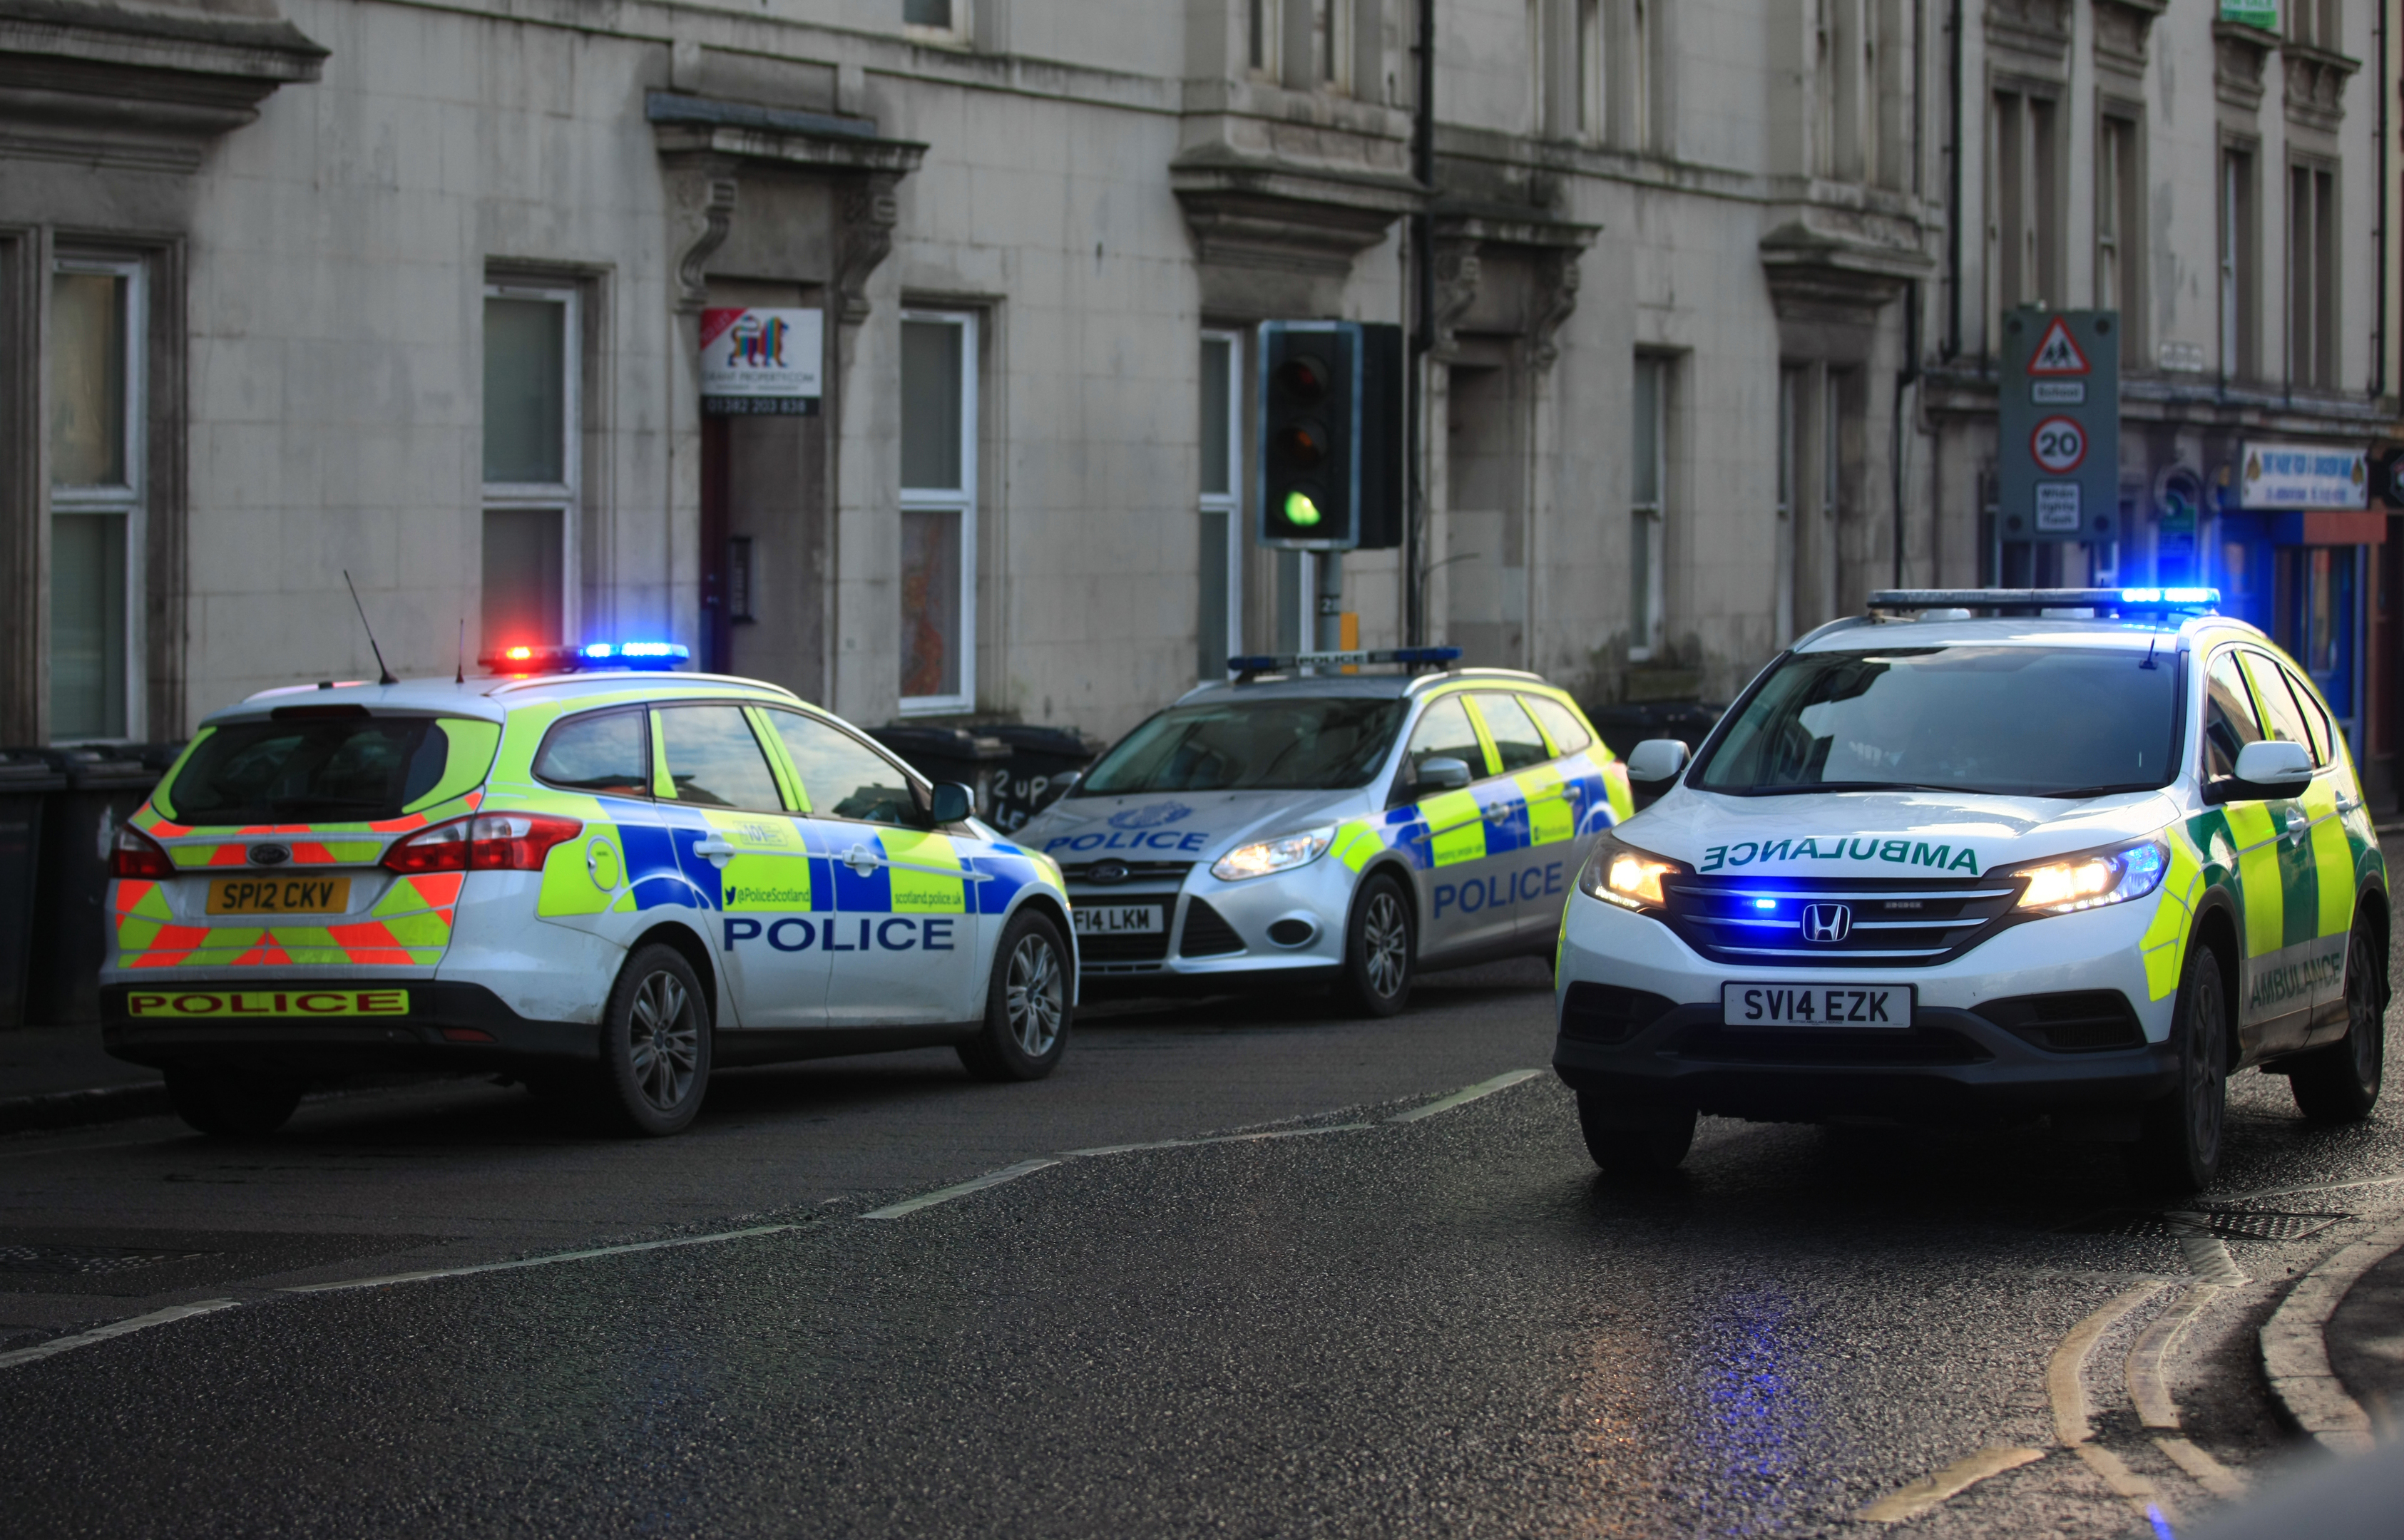 There was a heavy police presence outside 95 Arbroath Road